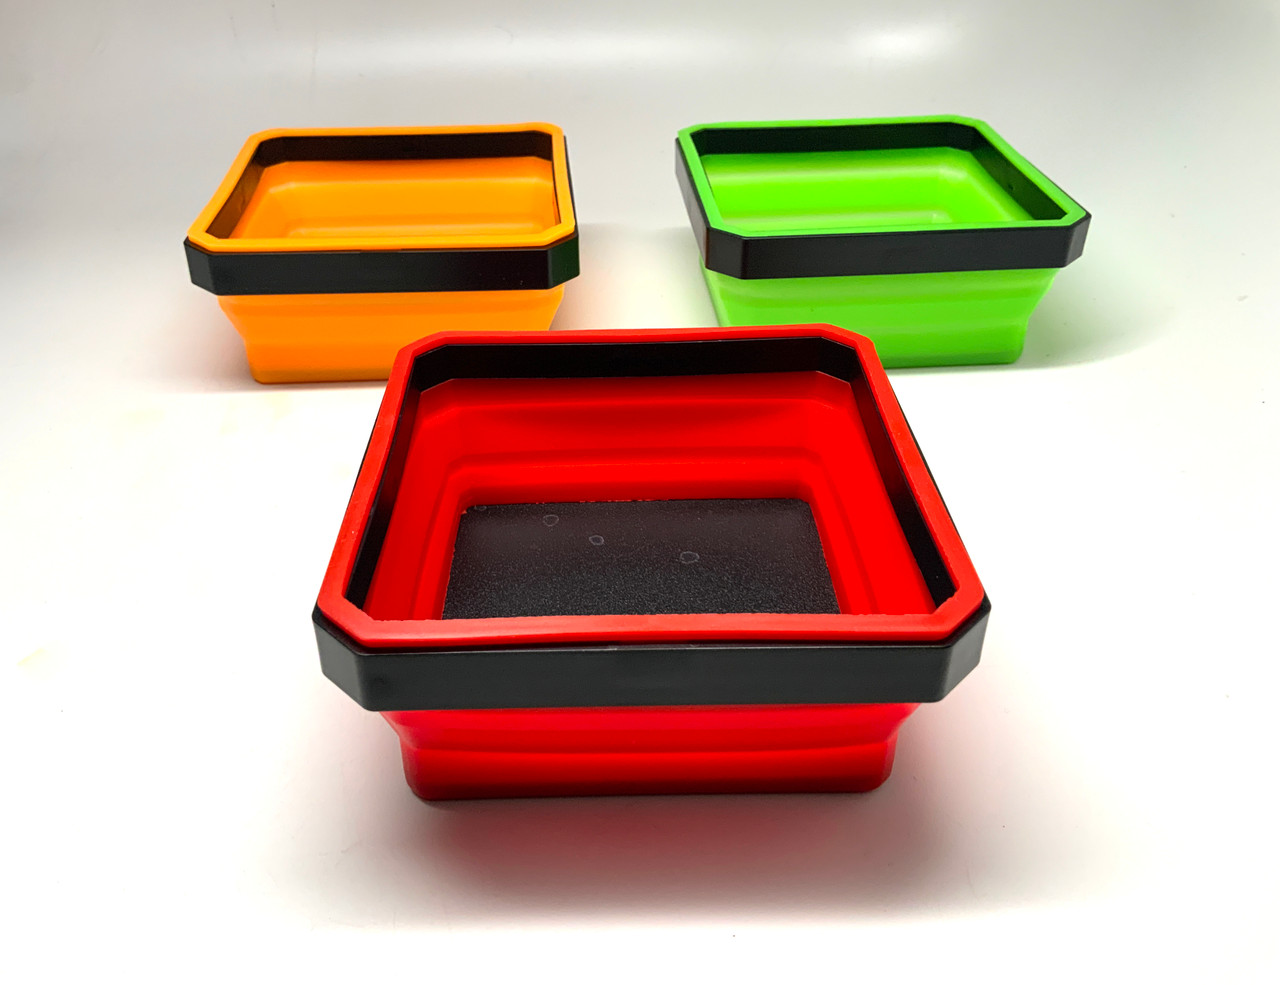 Sealey Parts Tray Collapsible Magnetic - Set of 3